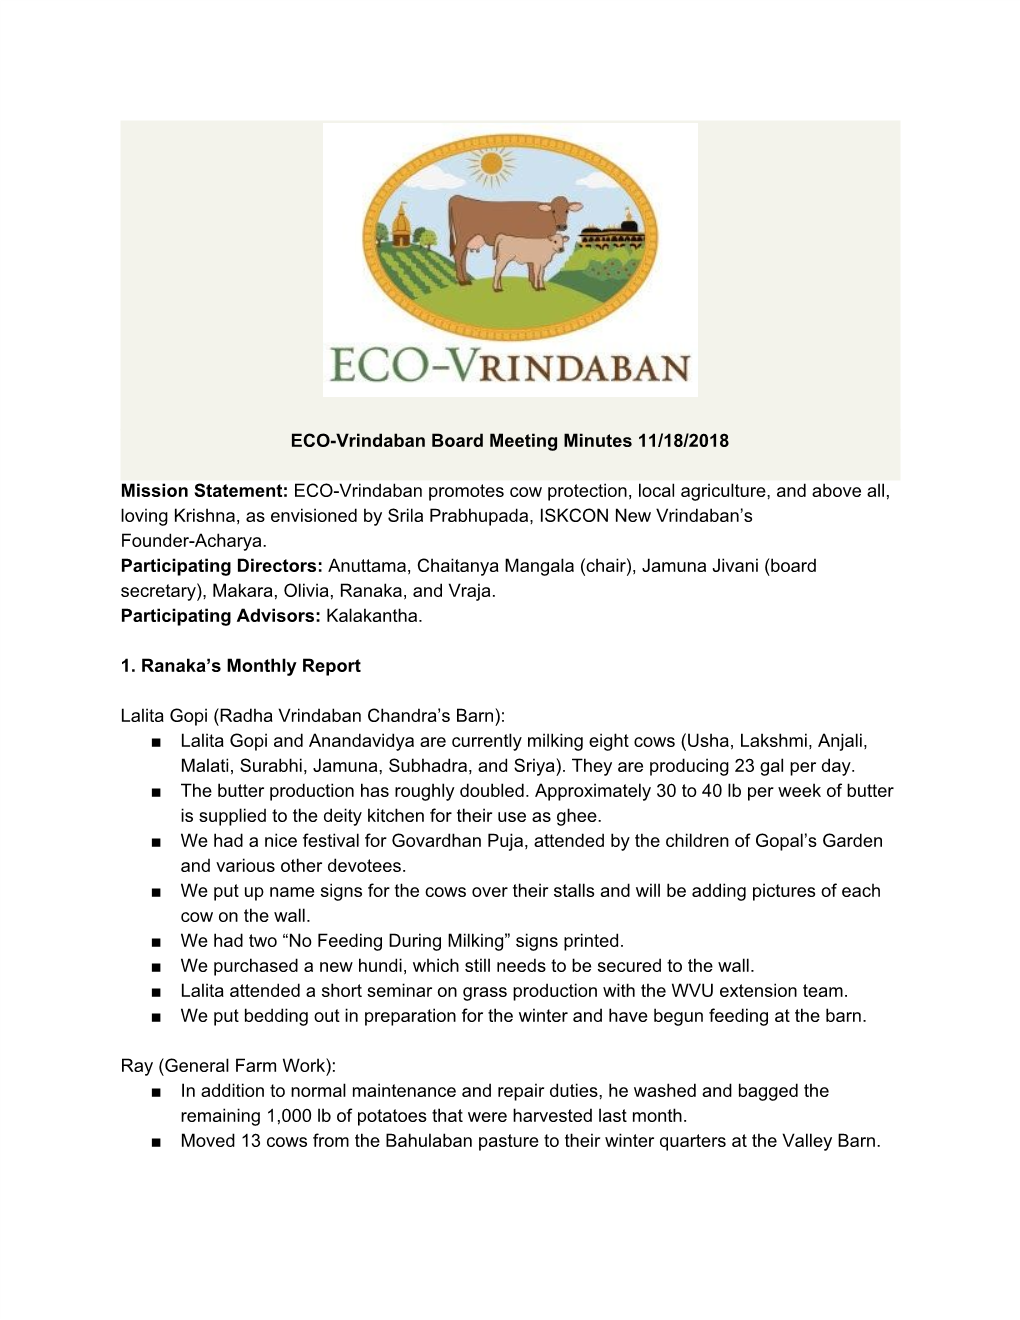 ECO-Vrindaban Promotes Cow Protection, Local Agriculture, and Above All, ​ Loving Krishna, As Envisioned by Srila Prabhupada, ISKCON New Vrindaban’S Founder-Acharya